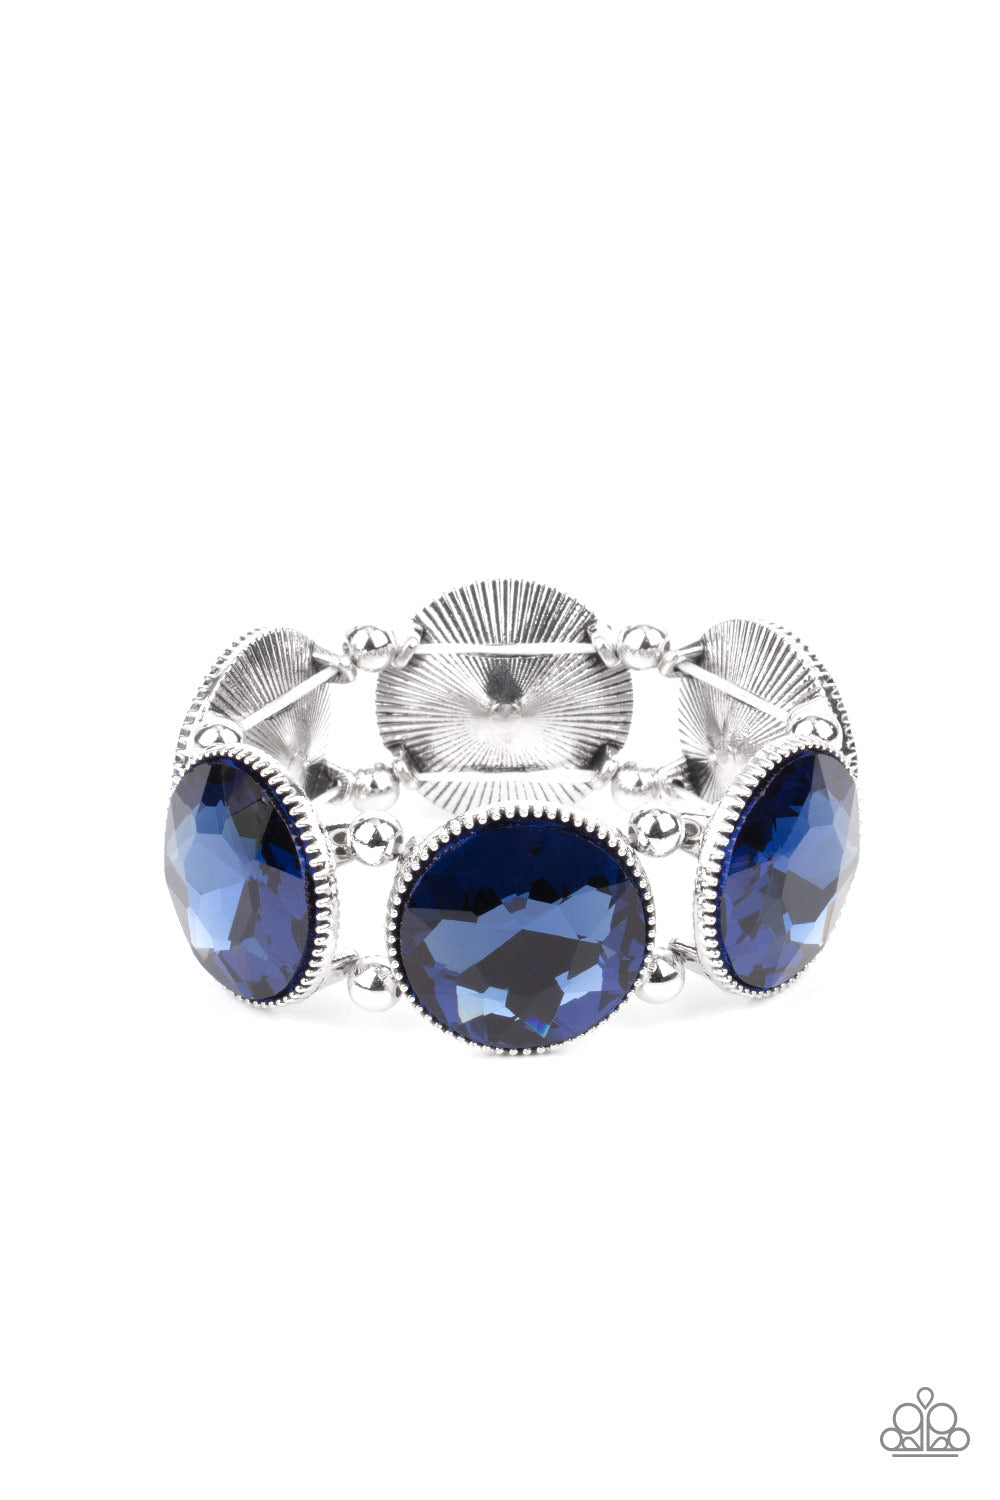 Powerhouse Hustle - Blue and Silver Stretchy Bracelet - Paparazzi Accessories - A glitzy collection of dramatically oversized Rhodonite blue rhinestone frames are threaded along stretchy bands around the wrist for a jaw-dropping dazzle. Sold as one individual bracelet. 